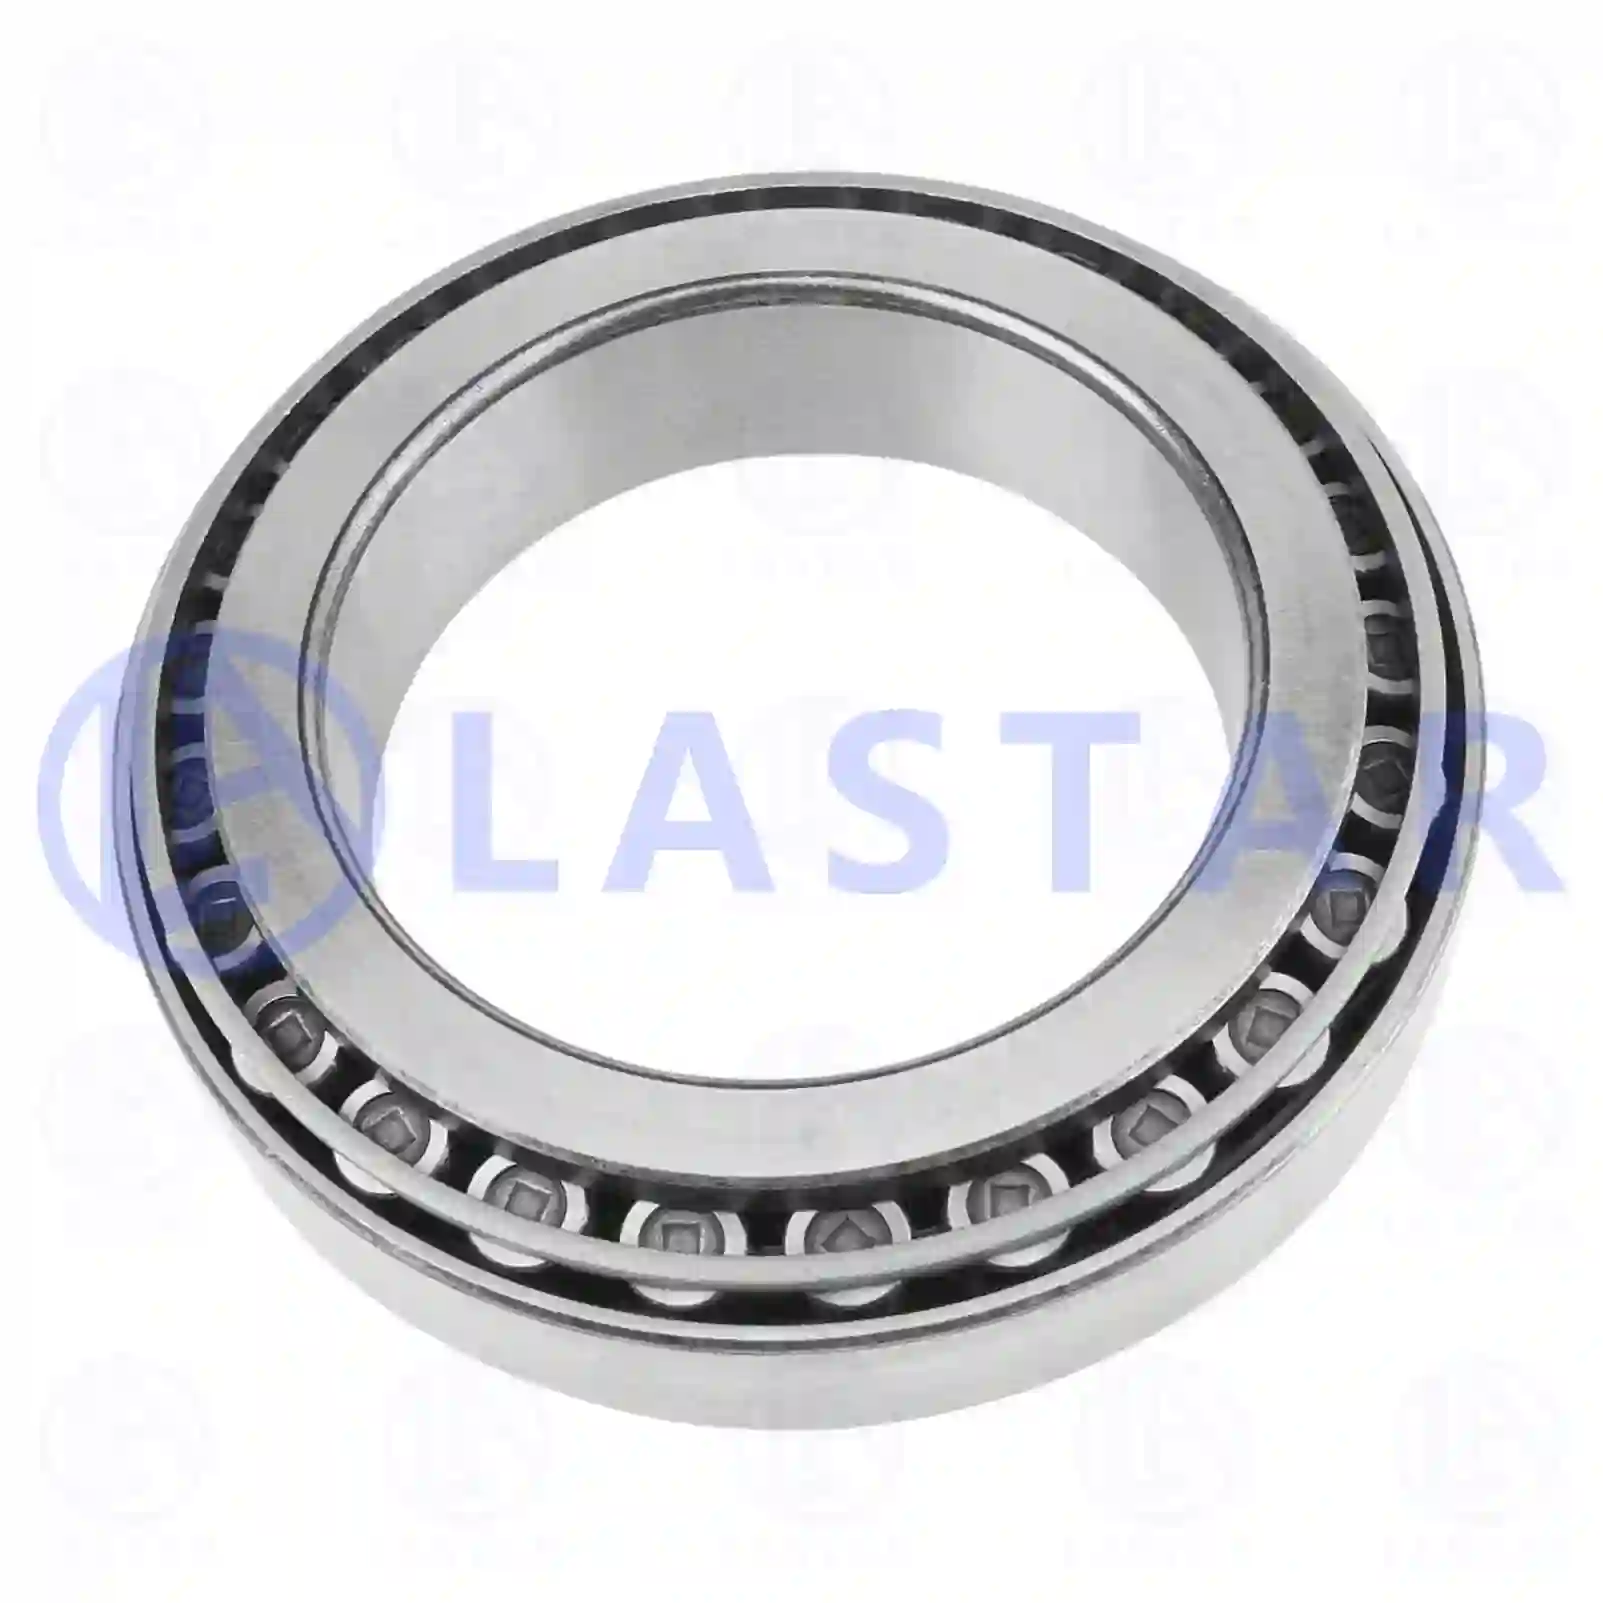 Hub Tapered roller bearing, la no: 77726358 ,  oem no:621285, 621286, 622103, 655407, AMPA012, 06324890012, 06324890064, 06324890114, 000720032019, 0019802602, 0019812602, 0029815405, 0039815105, 0039815405, 0069814705, 5000675133, 5000682662, 5010241096, 5010439224, 5010534822, 5010587011, 1408175, 1911813, 32019XQ, 324714030000, 324741030000, 20593429, 6210074, ZG02994-0008 Lastar Spare Part | Truck Spare Parts, Auotomotive Spare Parts